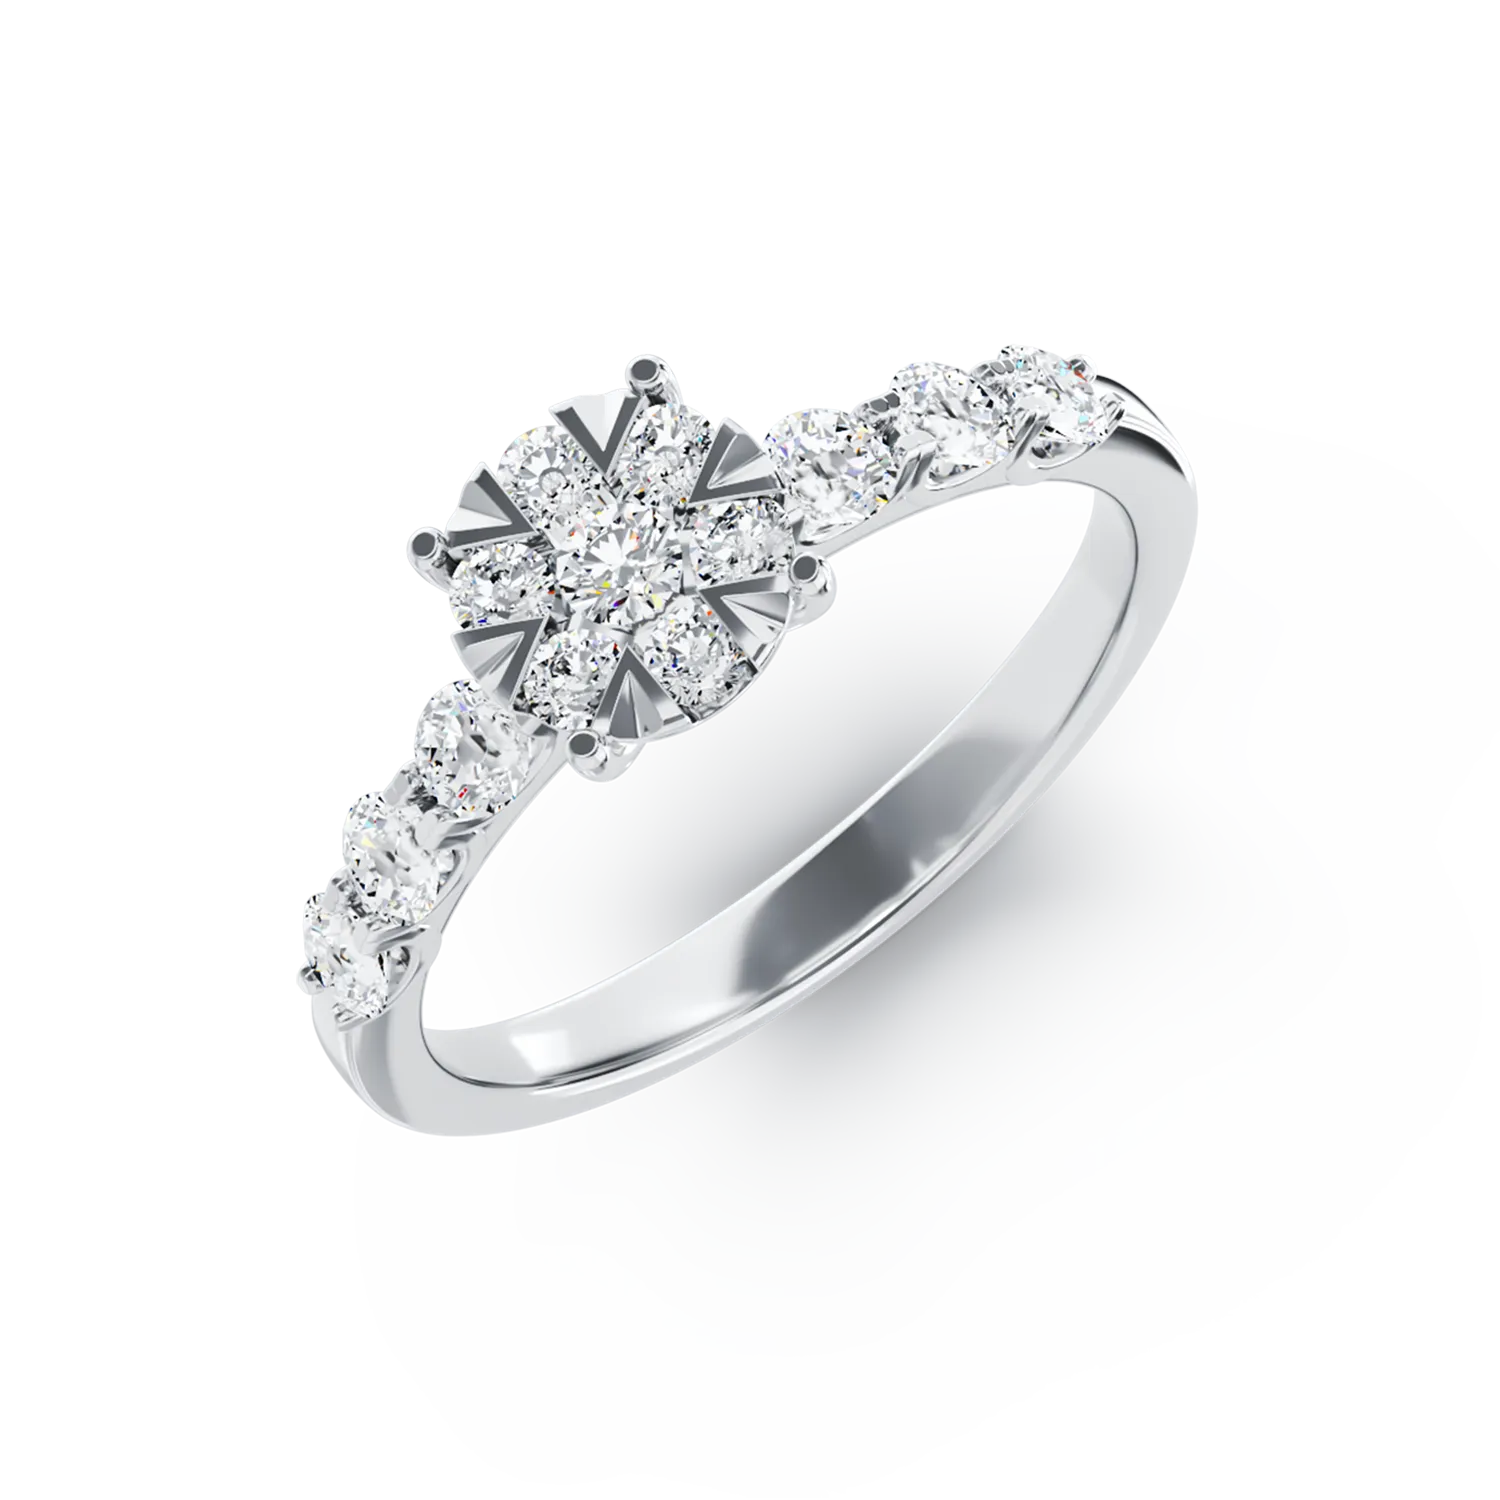 18k white gold engagement ring with 0.84ct diamonds